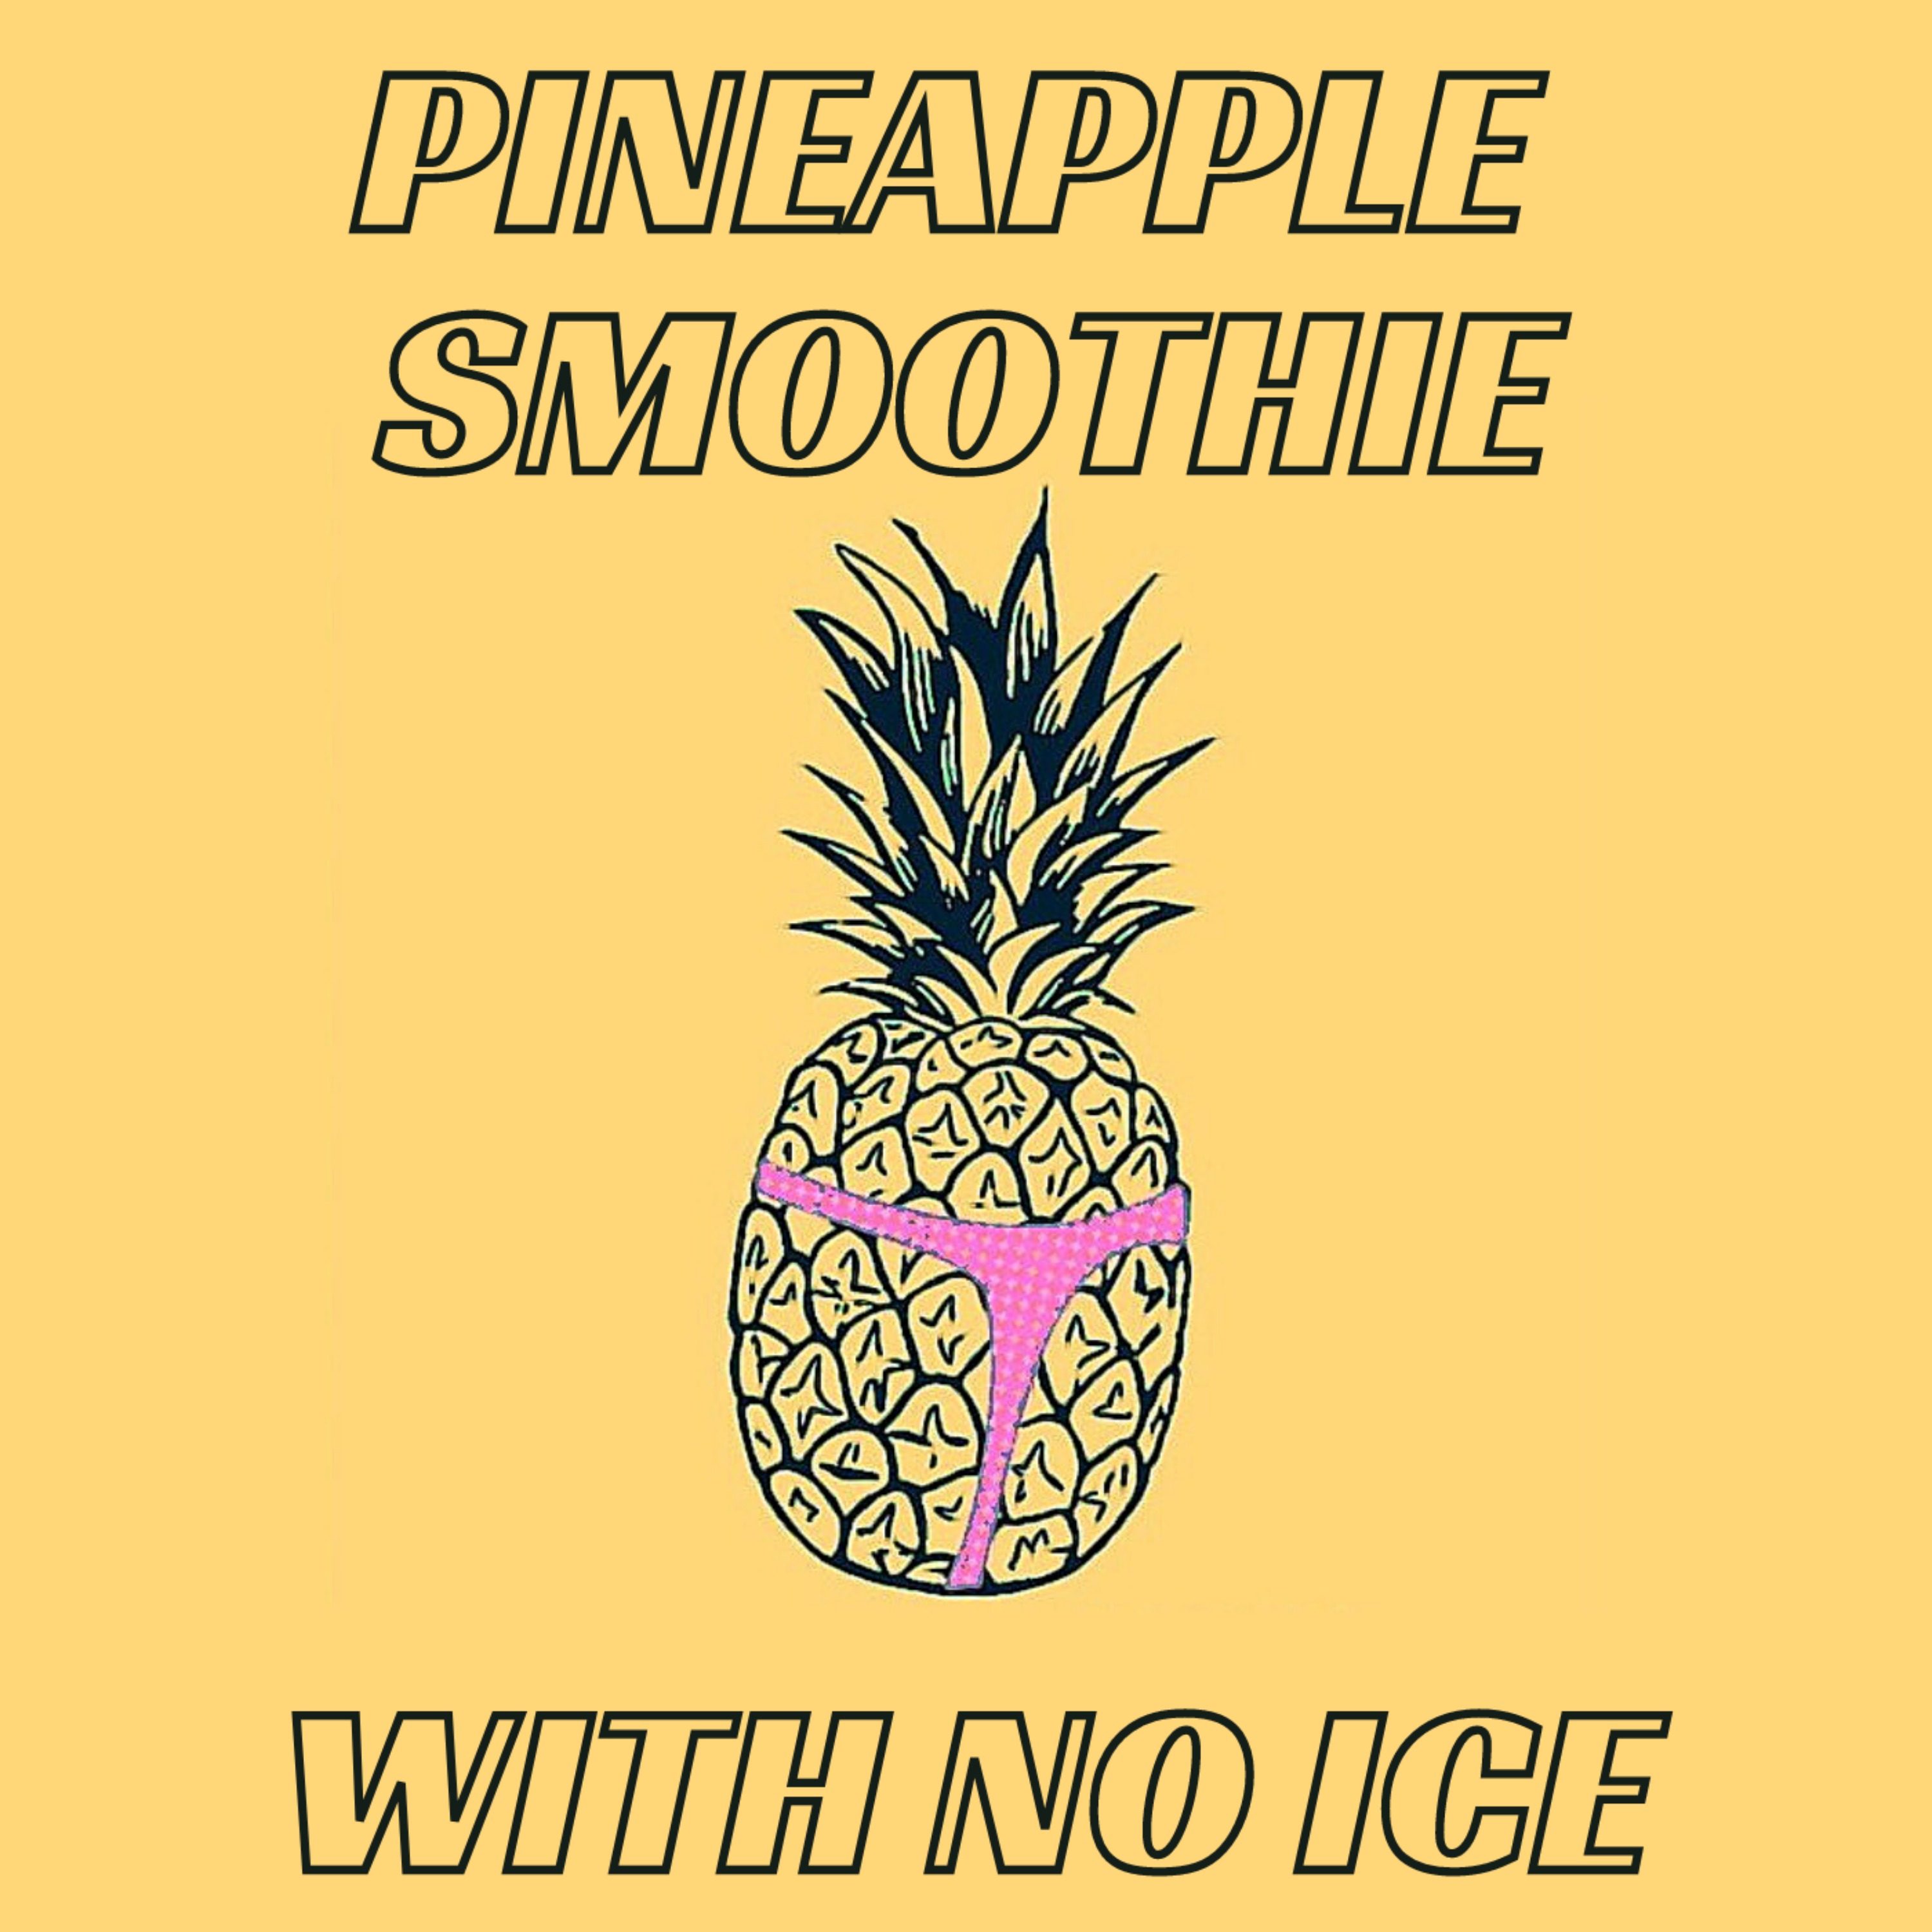 Urban Legends #2 - Pineapple Smoothie, No Ice & The Crown Casino Morgue